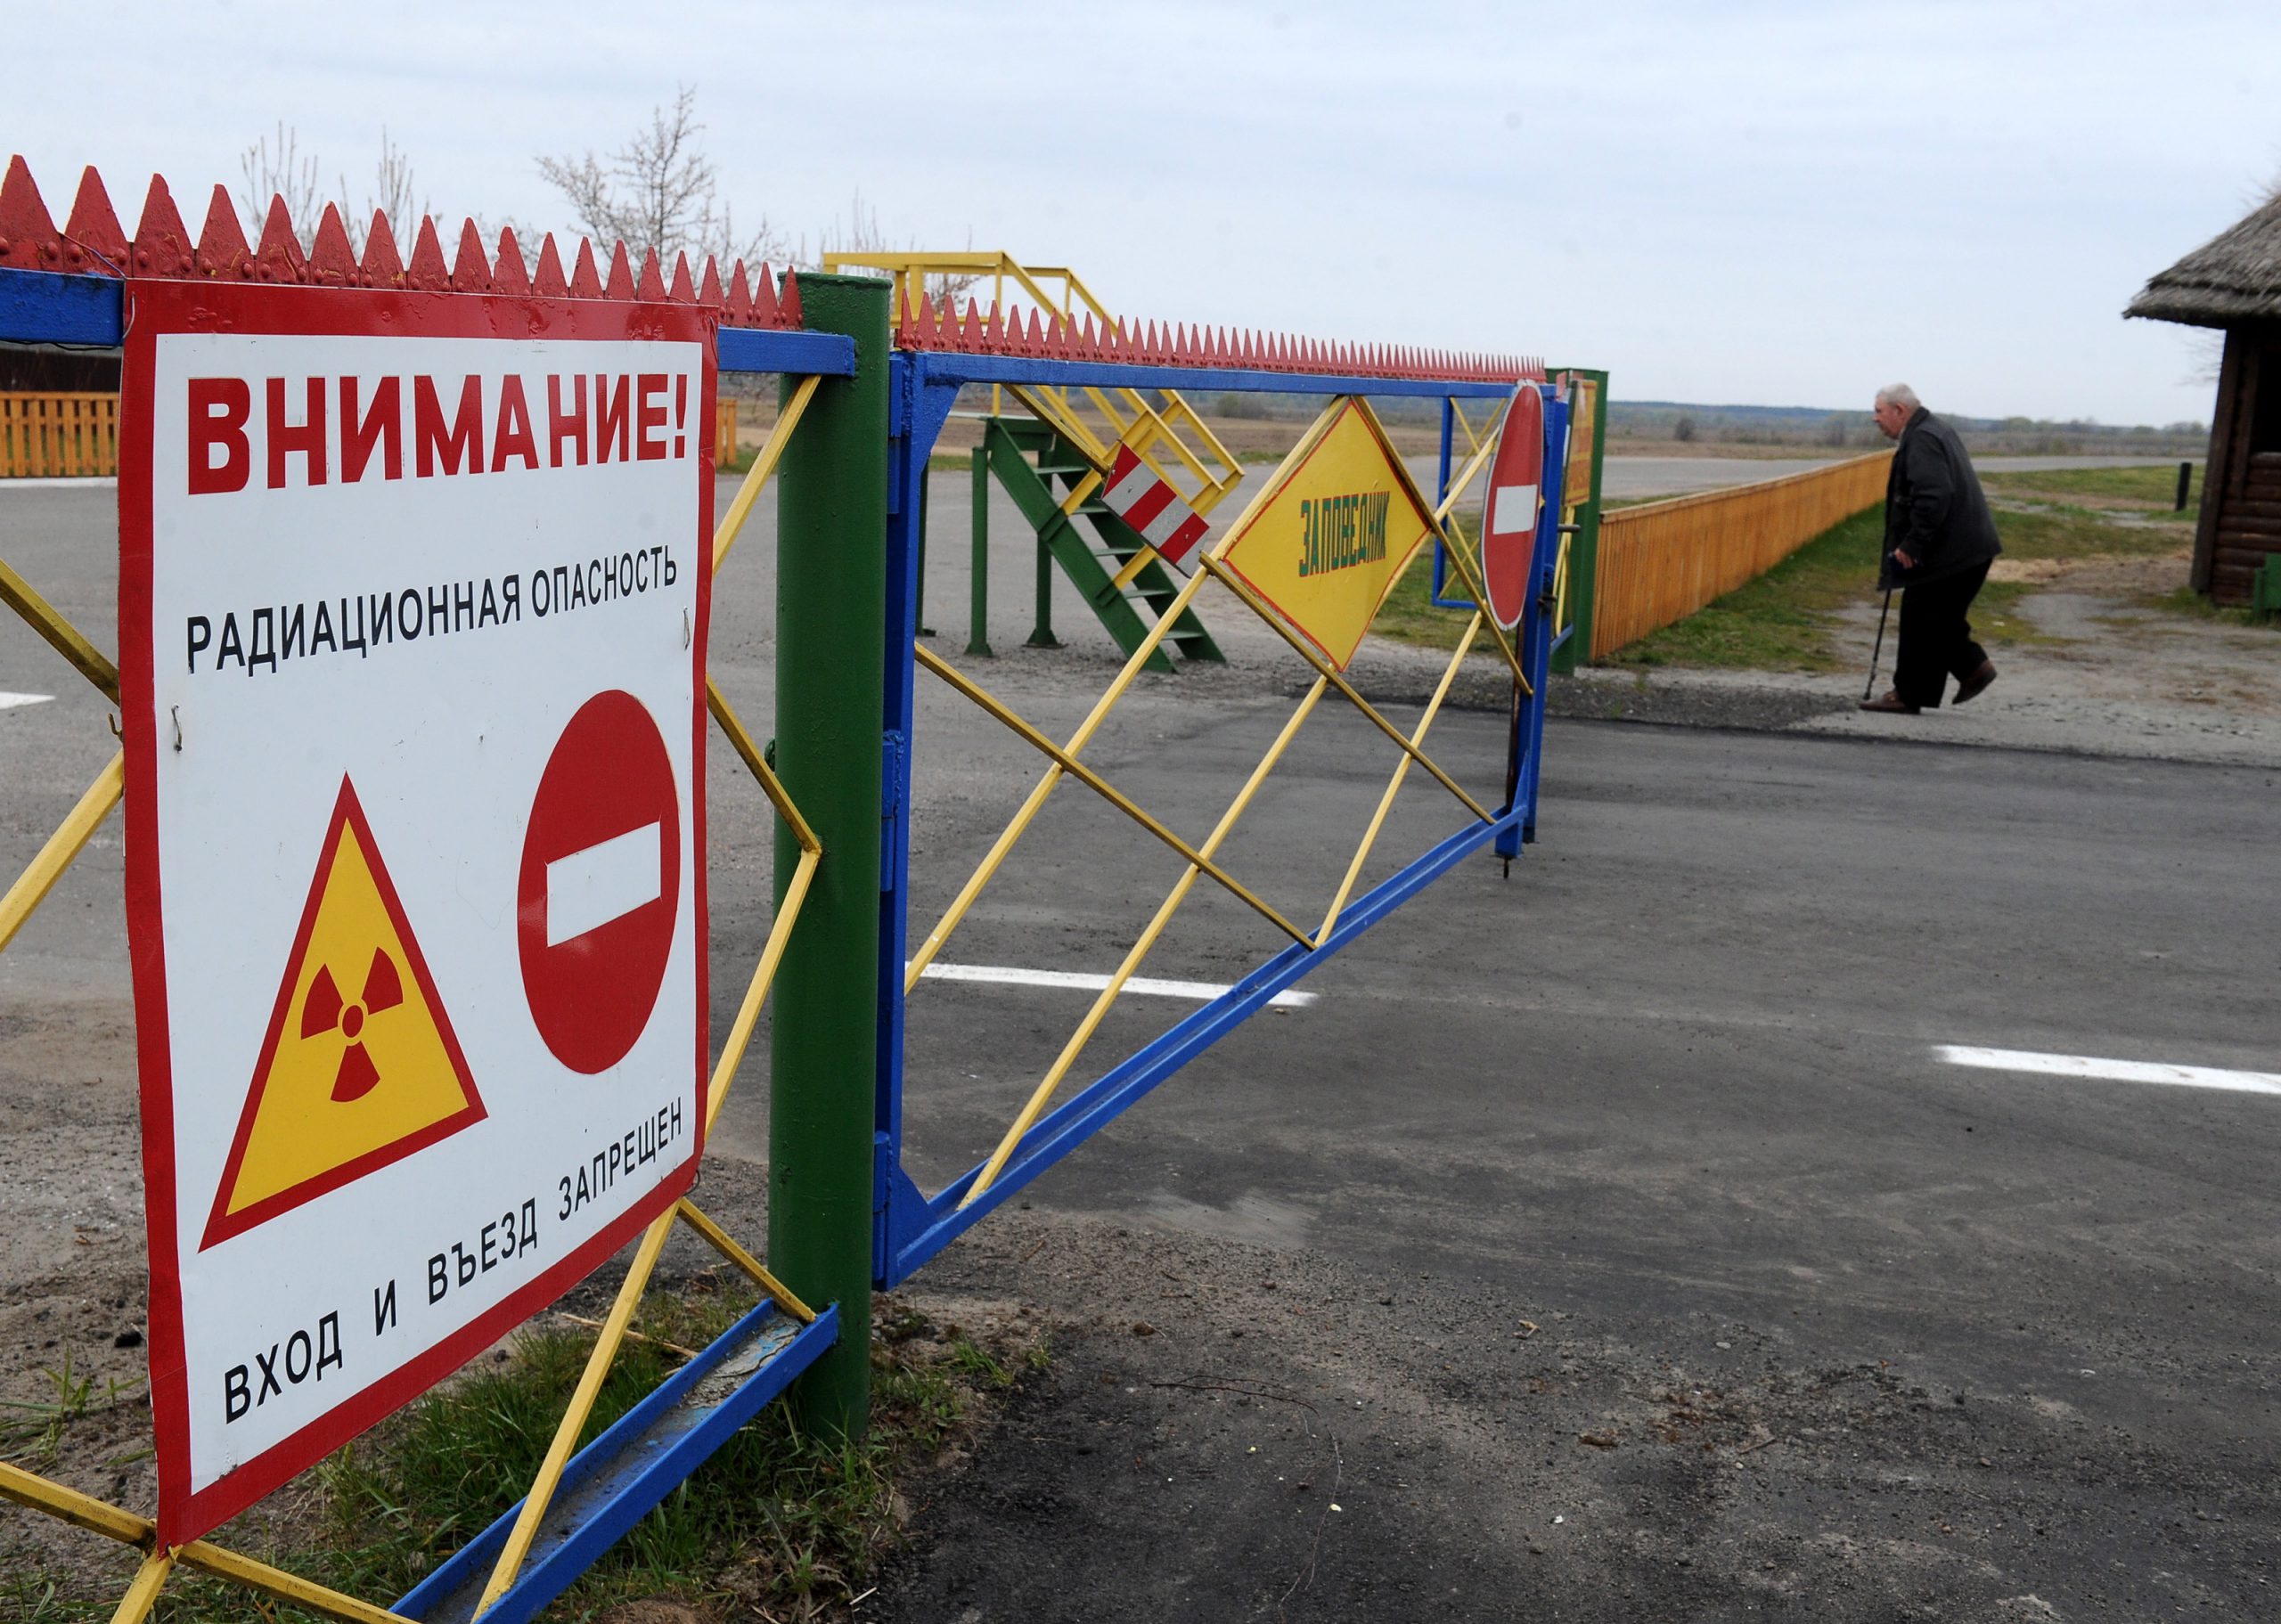 Political parties have failed to mobilise participants for Chernobyl Path; civil society has attempted to diversify approaches to commemorating the Chernobyl accident